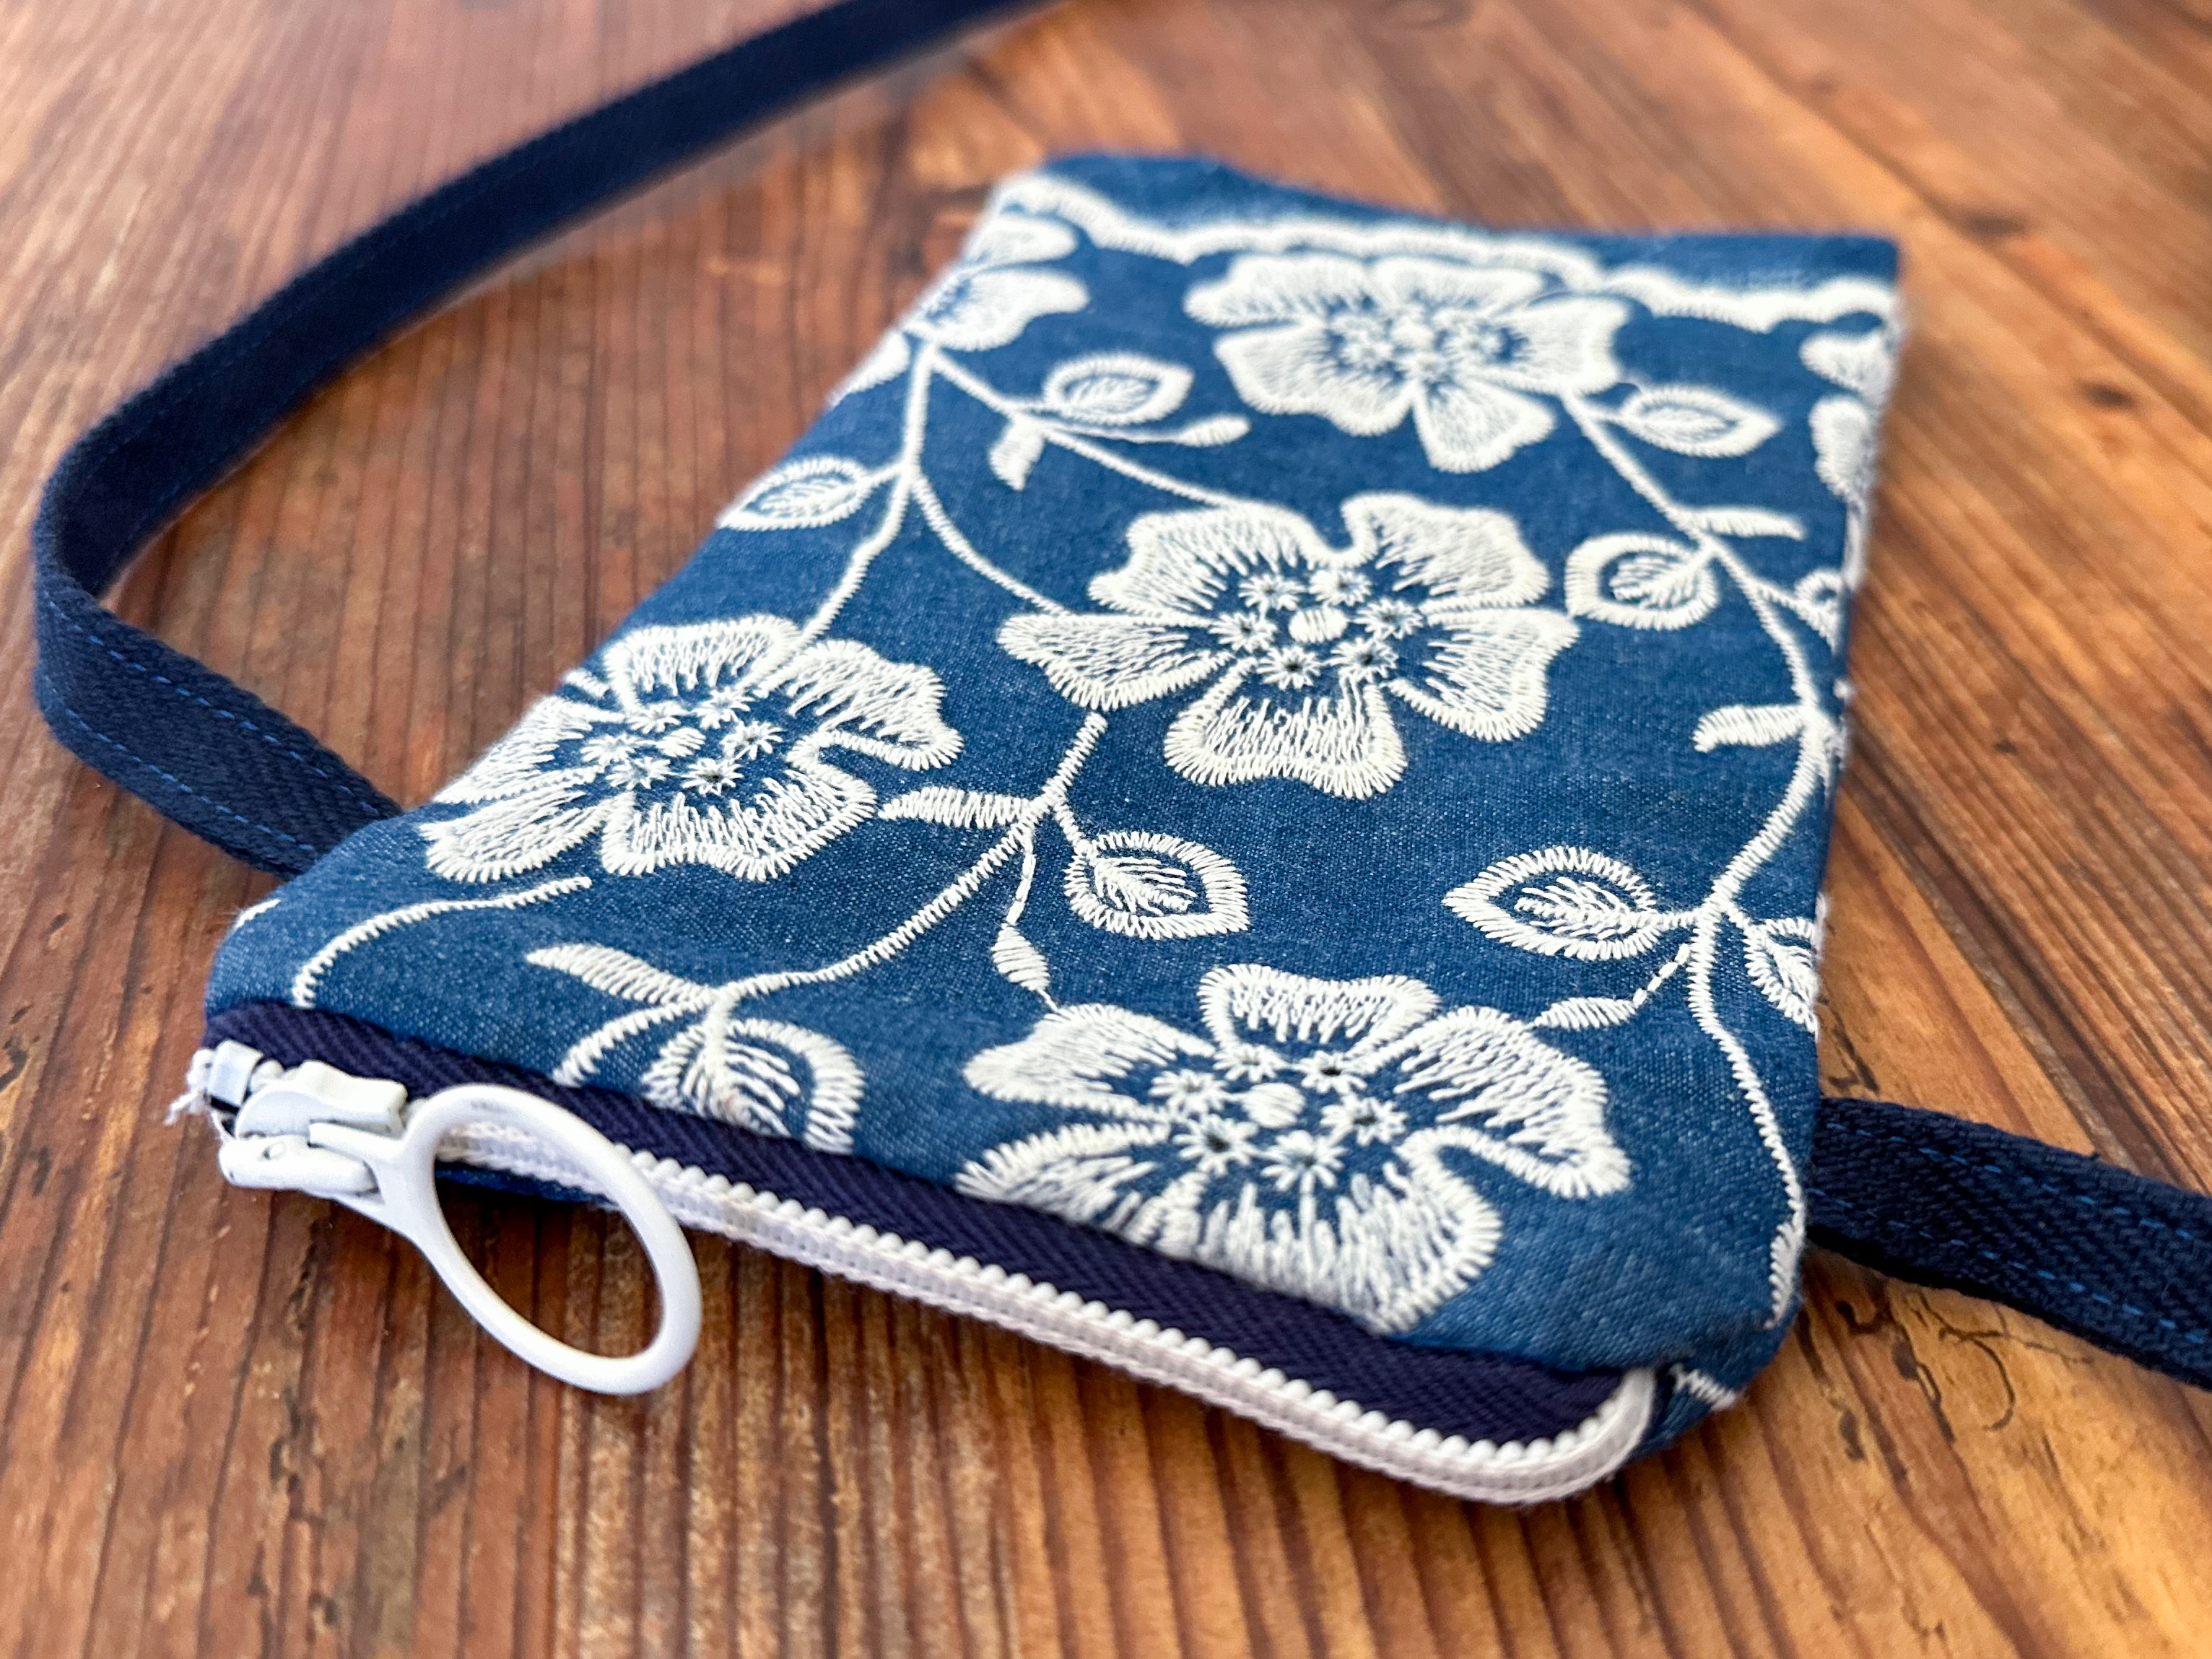 How to Sew a Baguette Bag - free sewing pattern for a small purse!